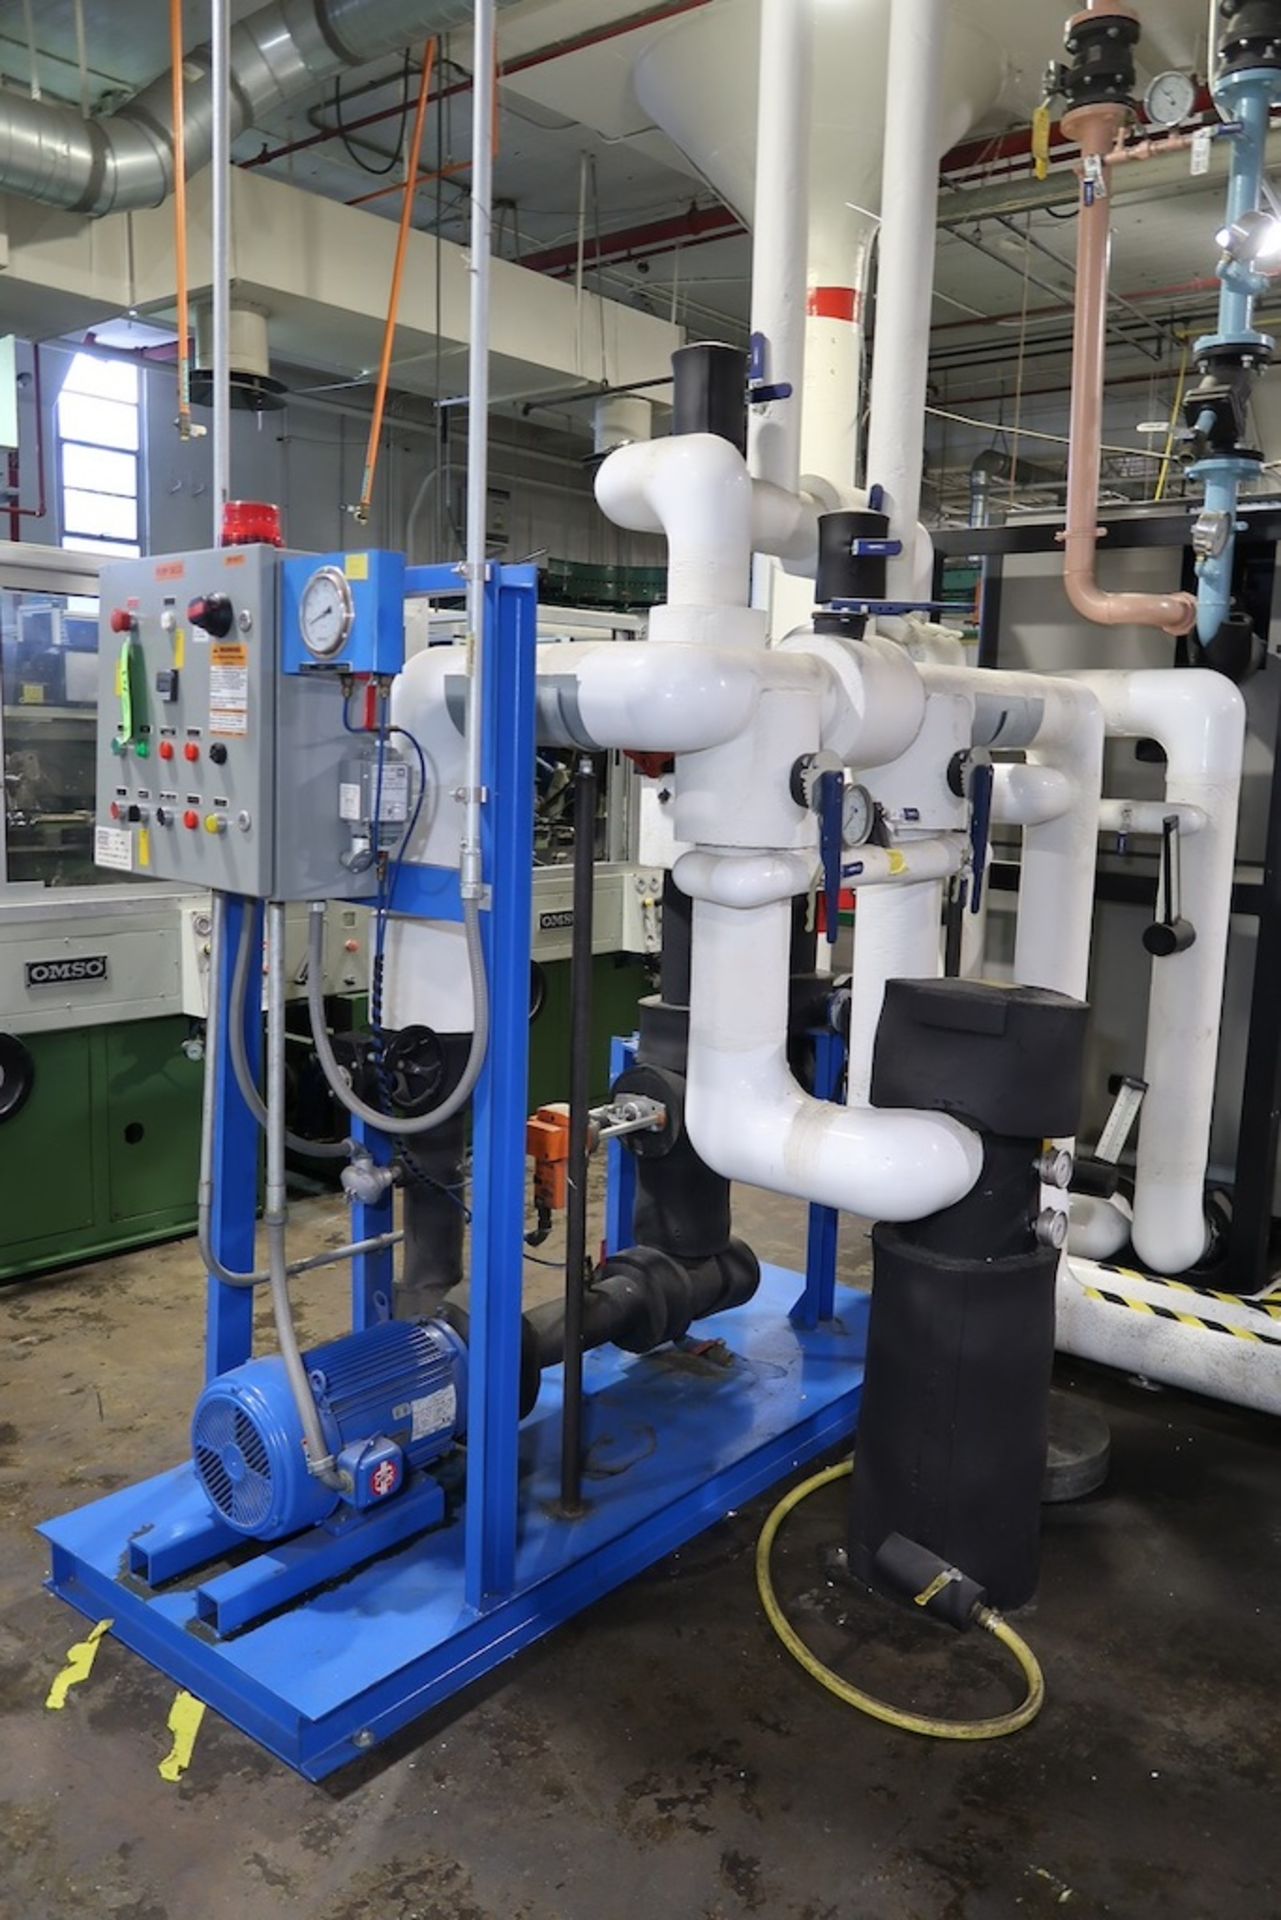 Process Systems 15-HP Pump Skid - Image 3 of 8